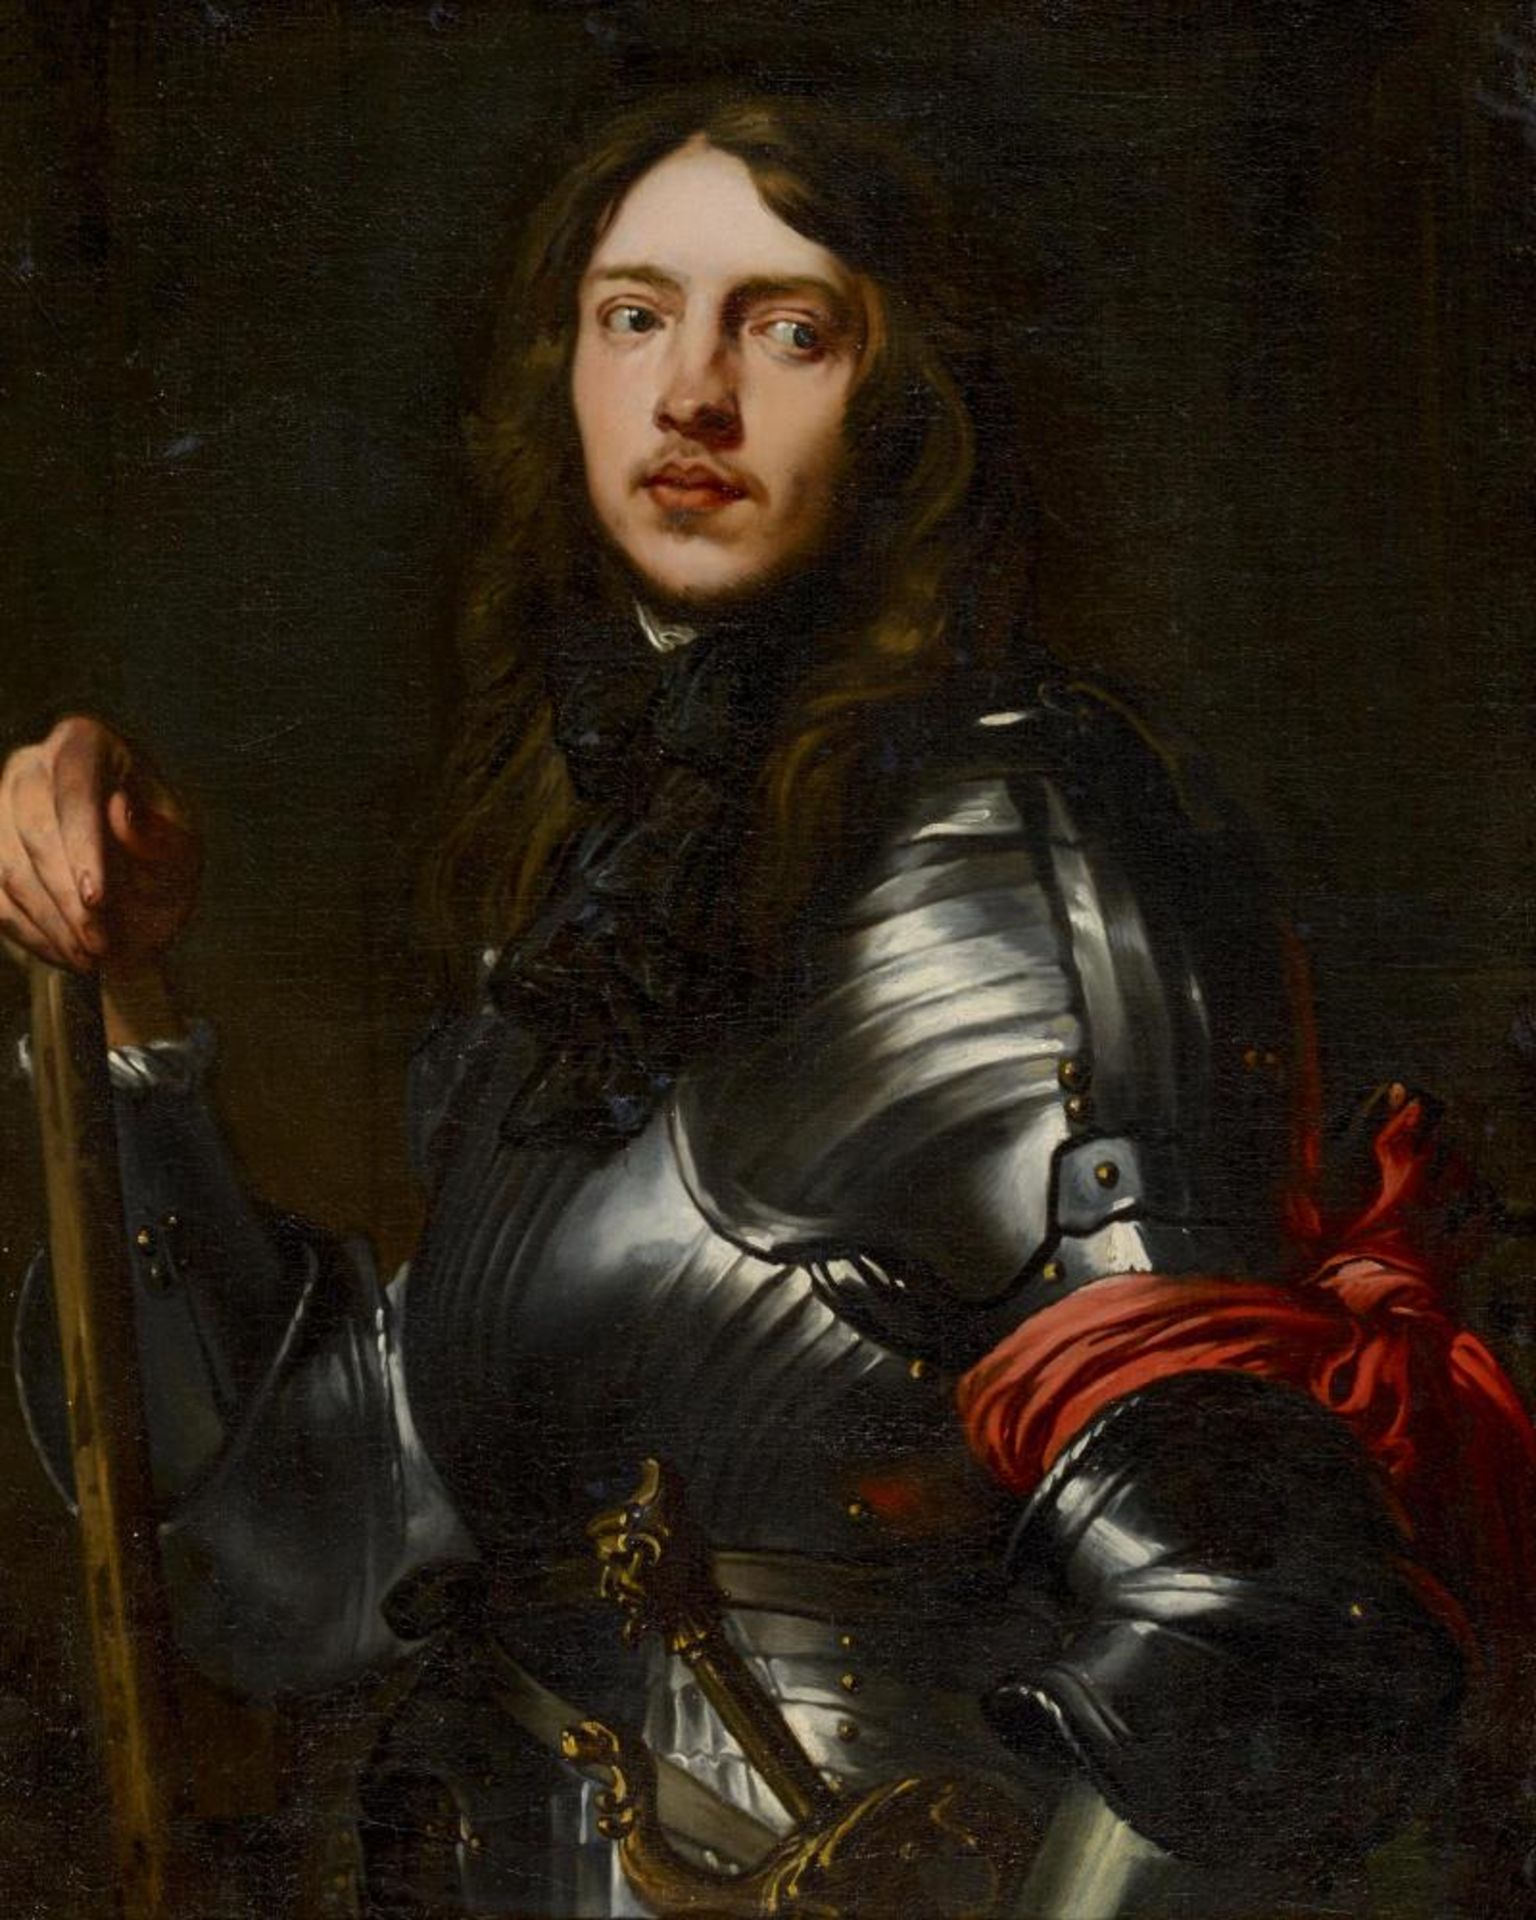 DYCK, ANTON VAN1599 Antwerp - 1641 LondonfollowerTitle: Man in Armour with Red Armband. Copy based